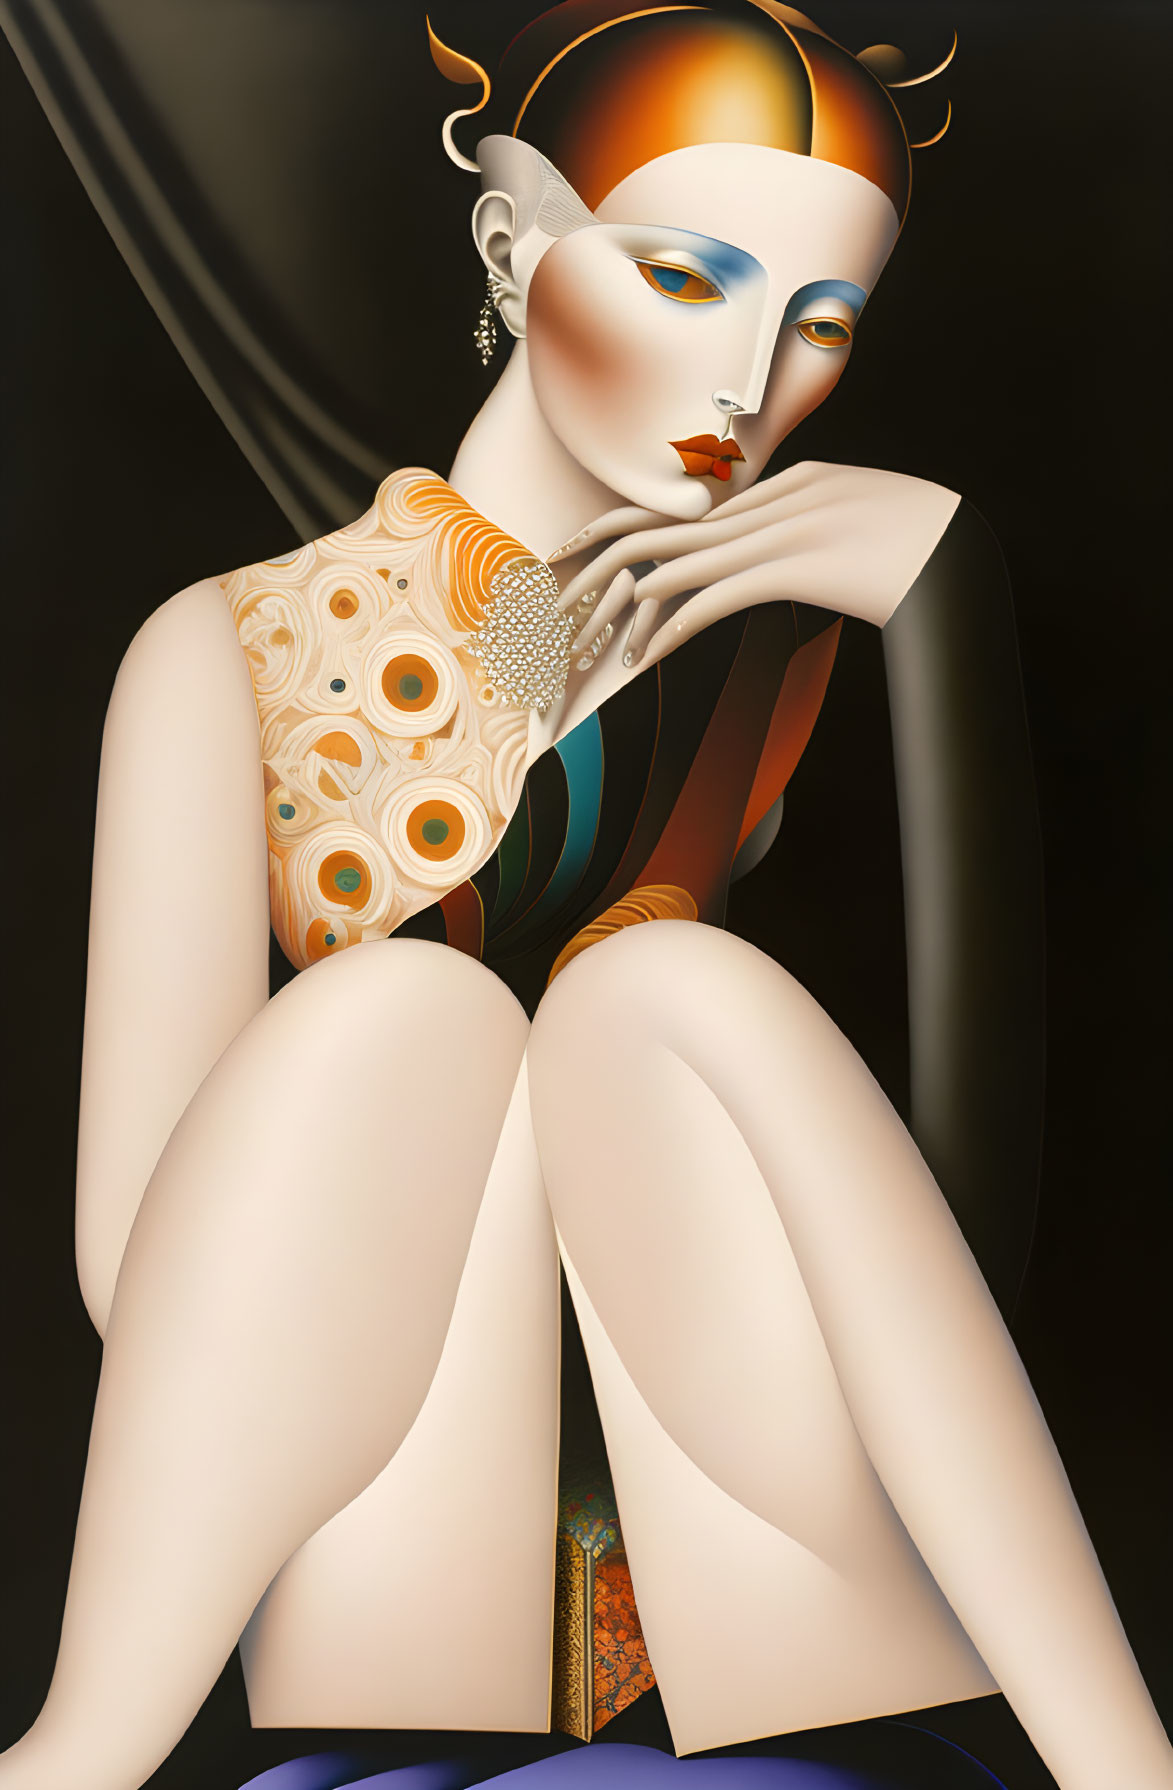 Stylized female figure in ornate costume with abstract face, seated with chin on hand